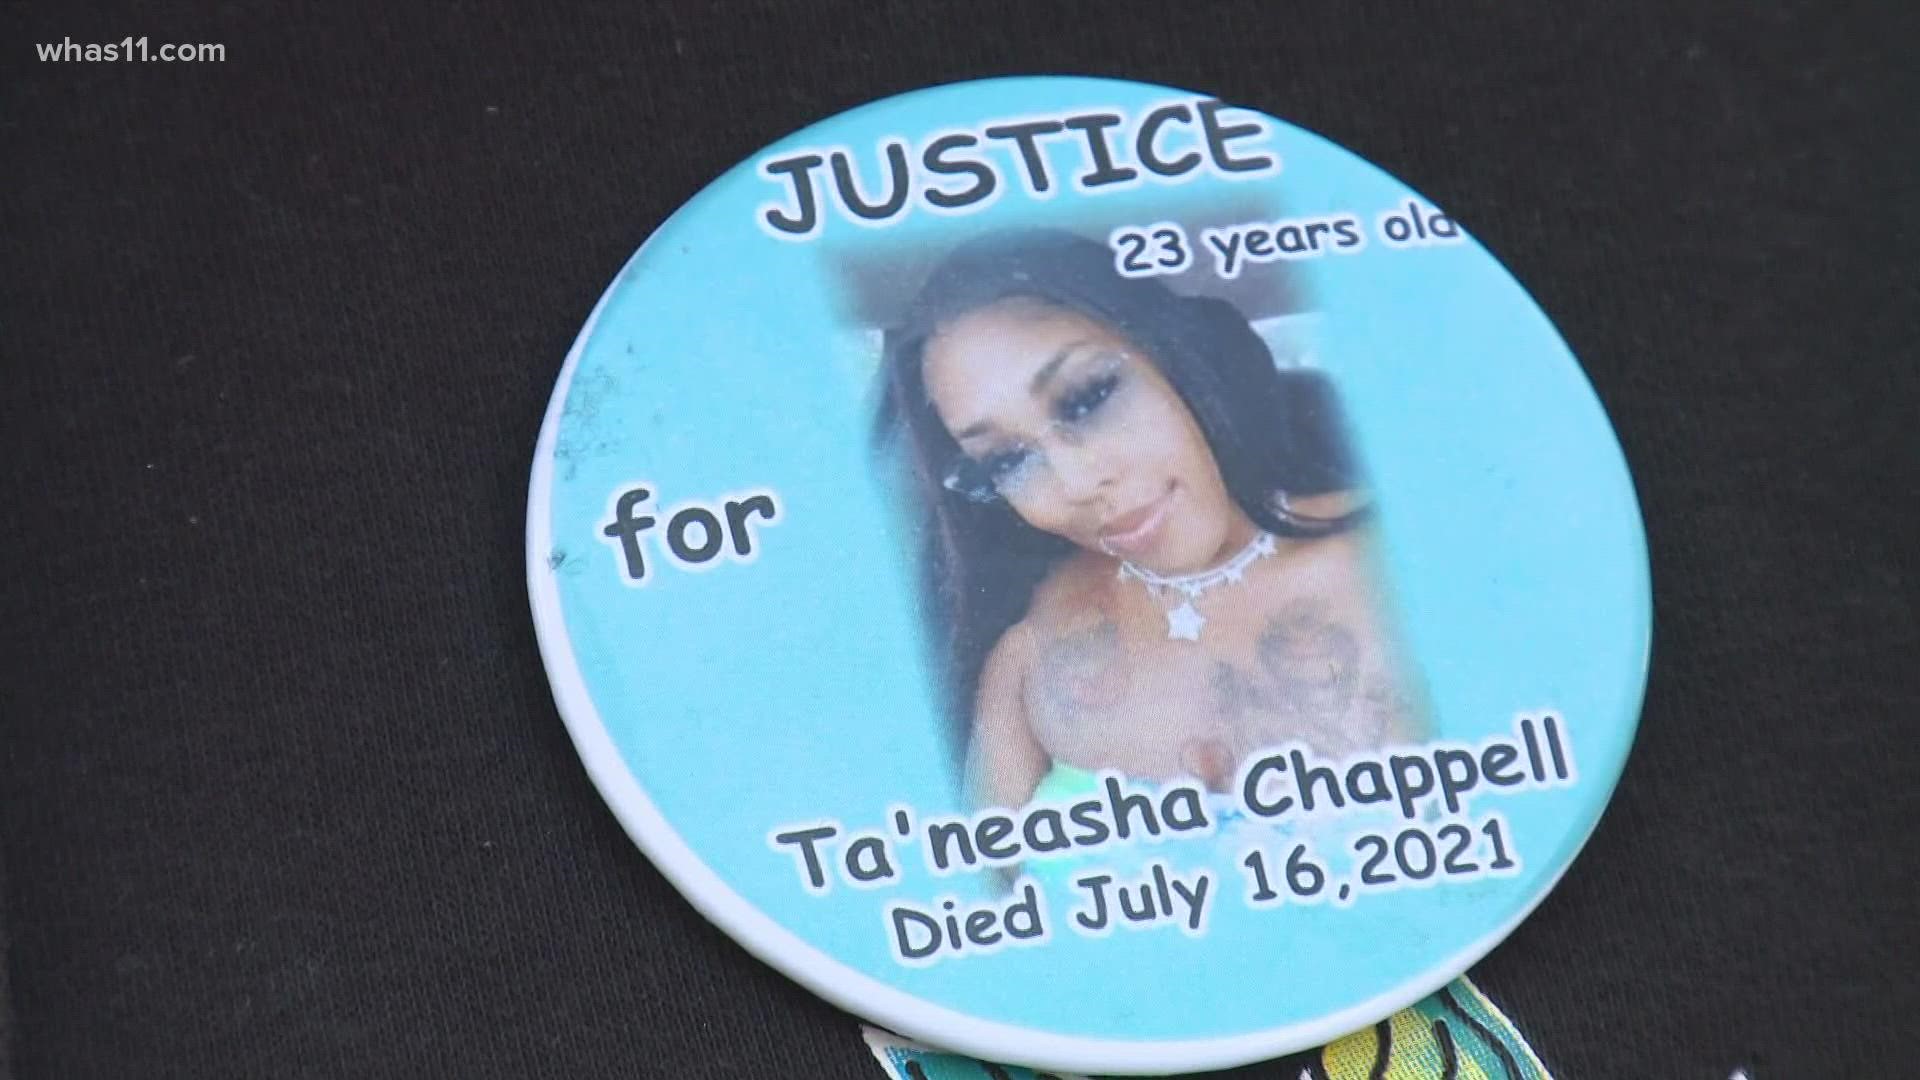 Family and supporters gathered at the Jackson County Courthouse demanding answers in the July death of  23-year-old Ta'Neasha Chappell.